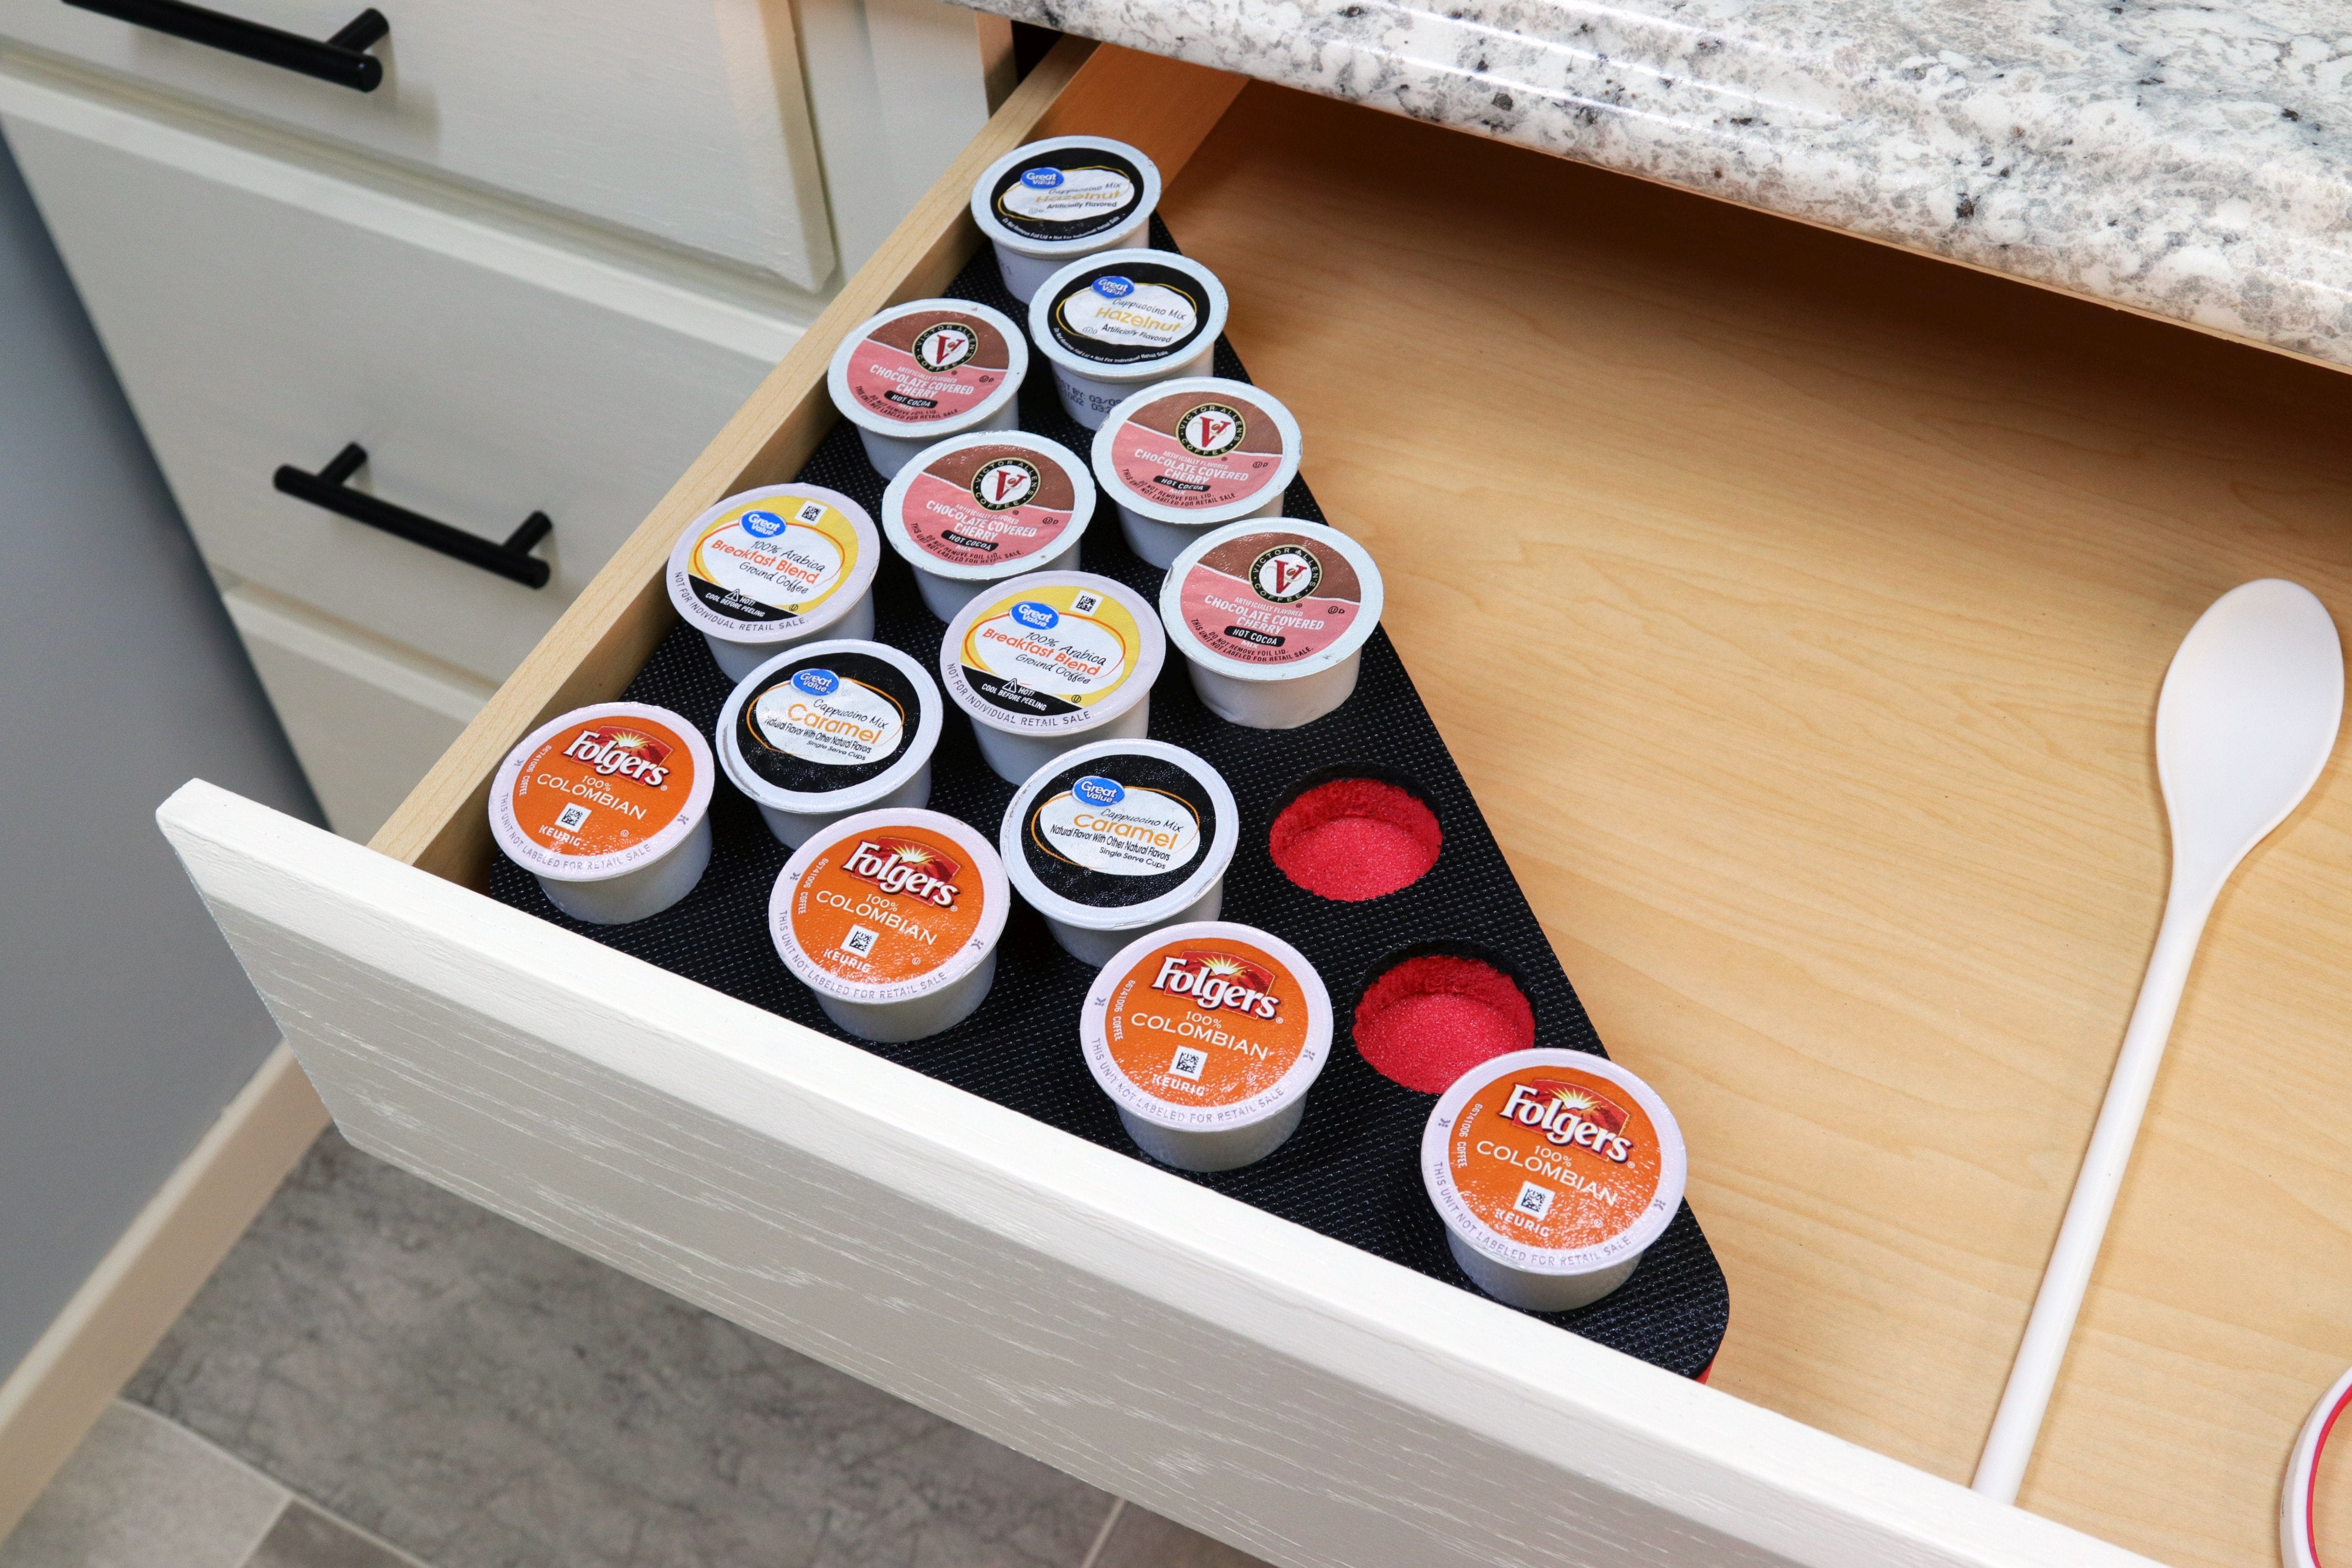 Coffee Corner Red Pod Storage Deluxe Organizer Tray Drawer Insert Washable 11.5 X 11.5 x 15.5 Inches Holds 16 Compatible with Keurig K-Cup